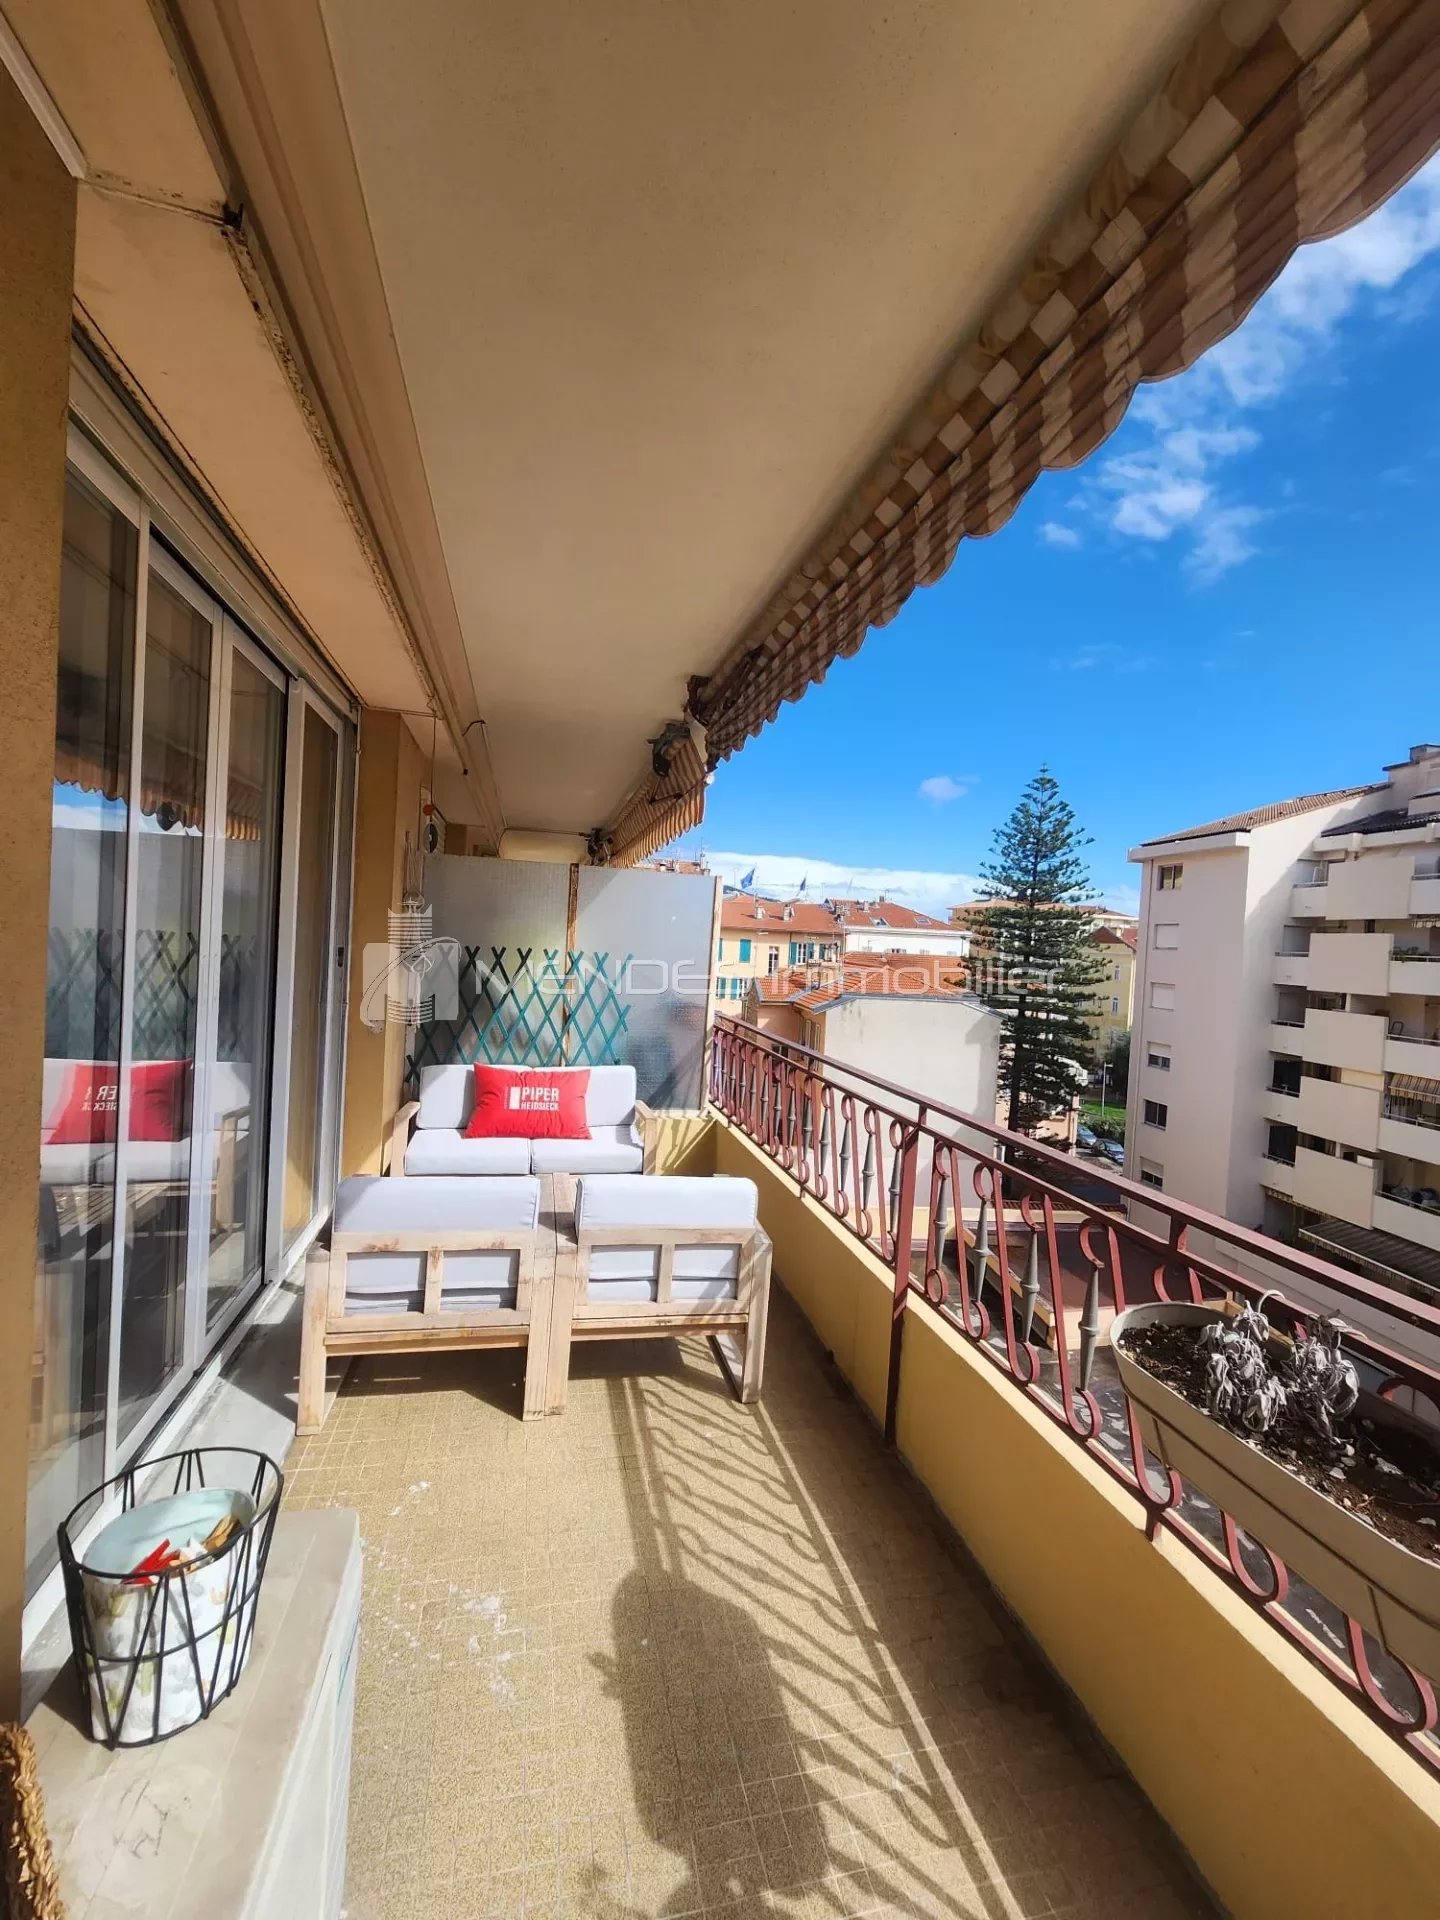 CHARMING FLAT IN THE HEART OF MENTON